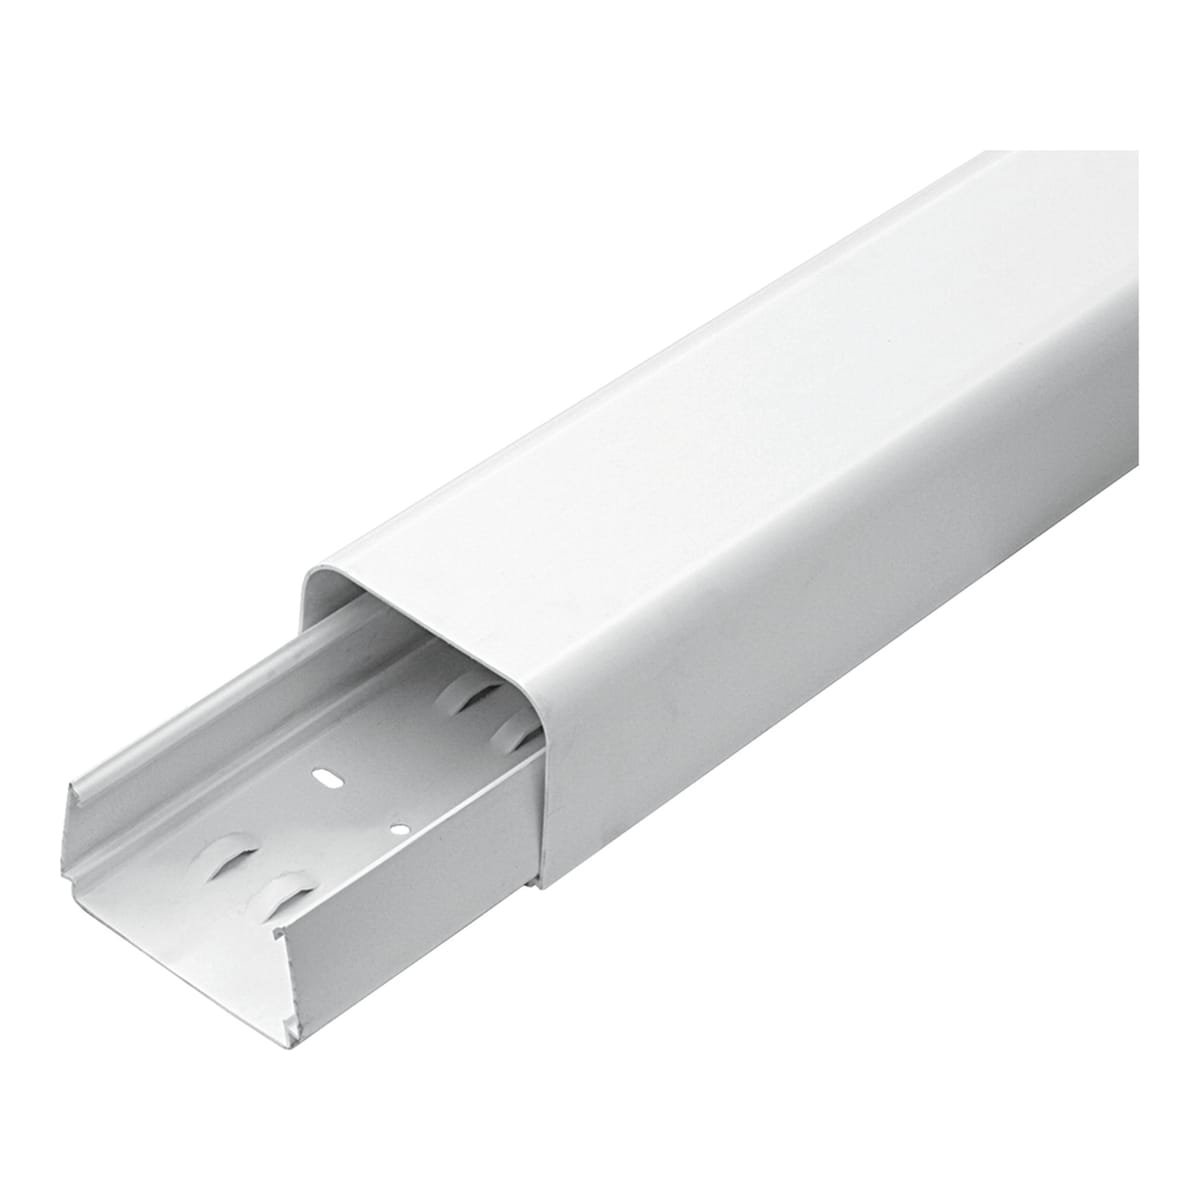 U-SHAPED CLIMATE DUCT 80X60 MM WHITE